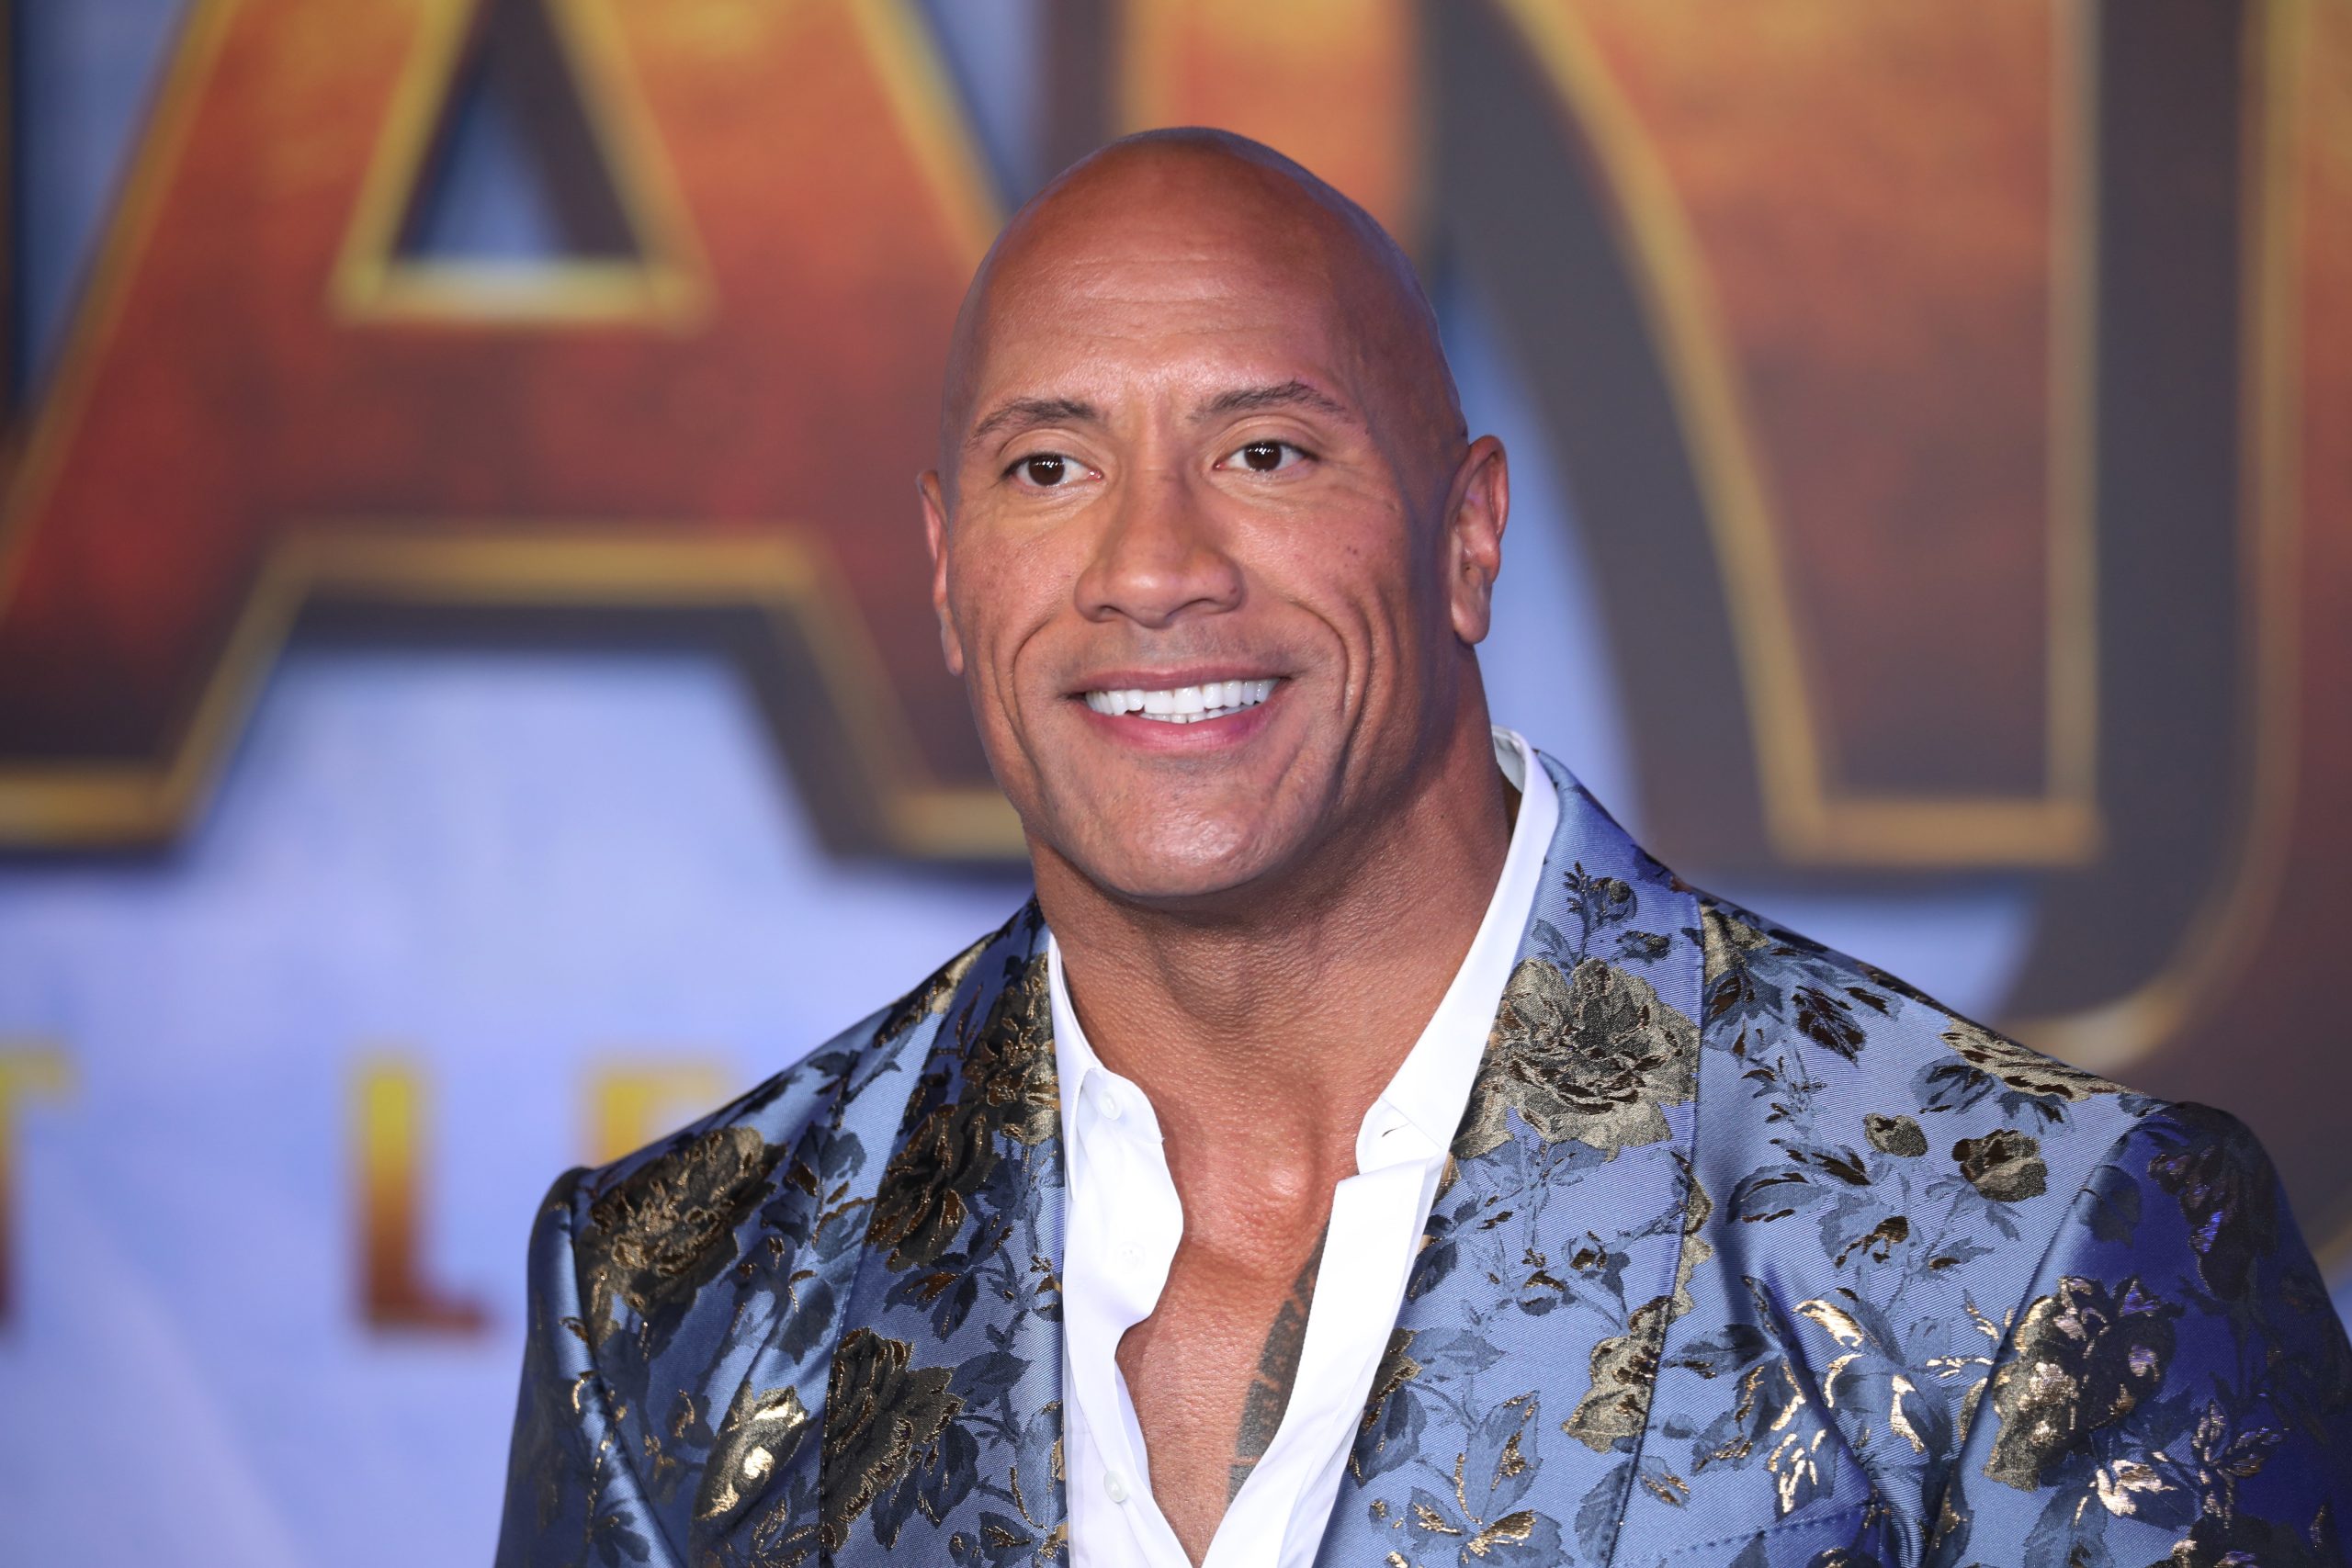 Dwayne Johnson's long-awaited movie is slipping too, and it's not good news